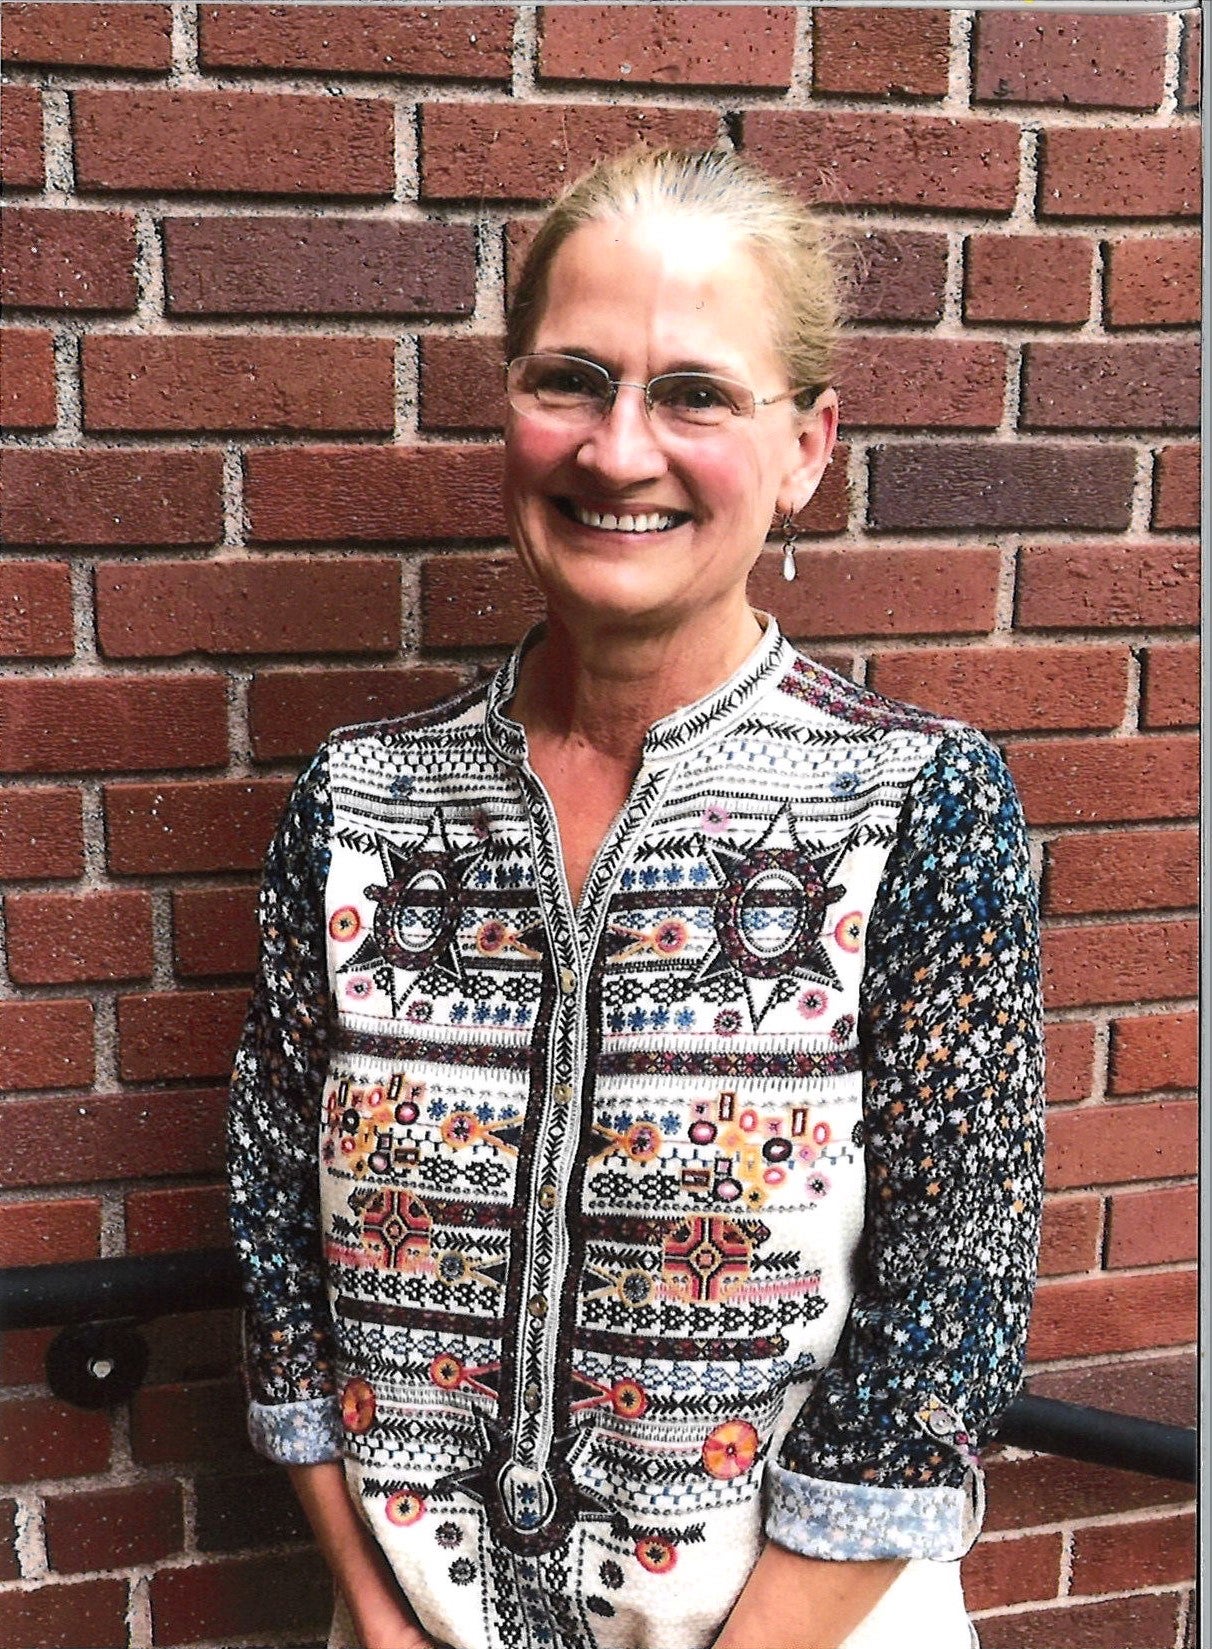 Katherine Kappelman smiling against a brick wall wearing a black and white patterned top